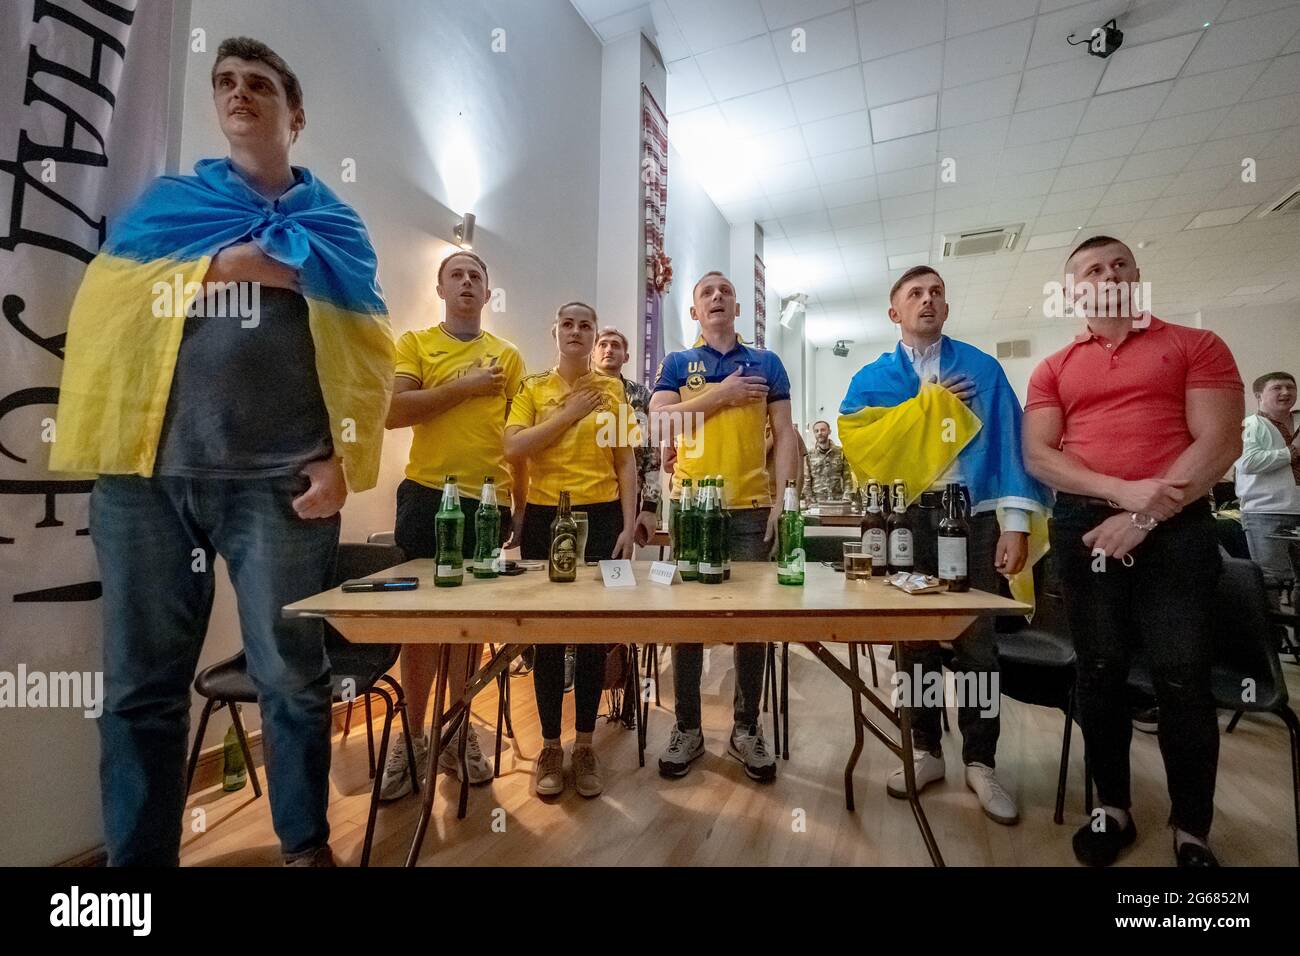 London, UK. 3rd July, 2021. UEFA EURO 2020: Ukraine vs England. British-Ukrainians stand for their national anthem prior to kick-off at the Association of Ukrainians in Great Britain venue (AUGB) in Holland Park. Credit: Guy Corbishley/Alamy Live News Stock Photo